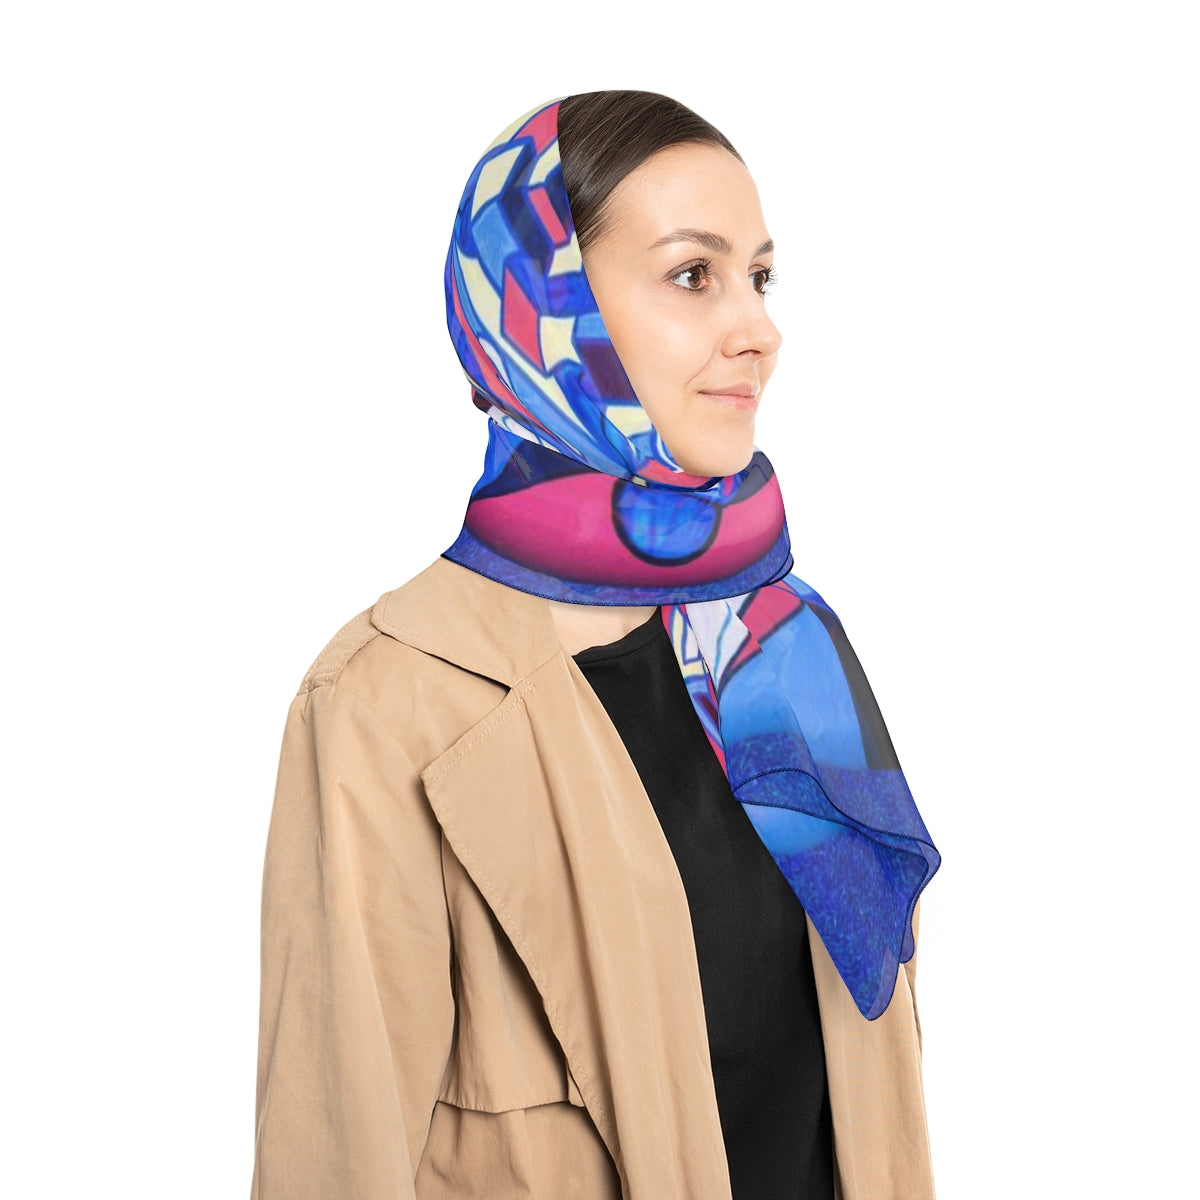 The Right Arrangement - Frequency Scarf